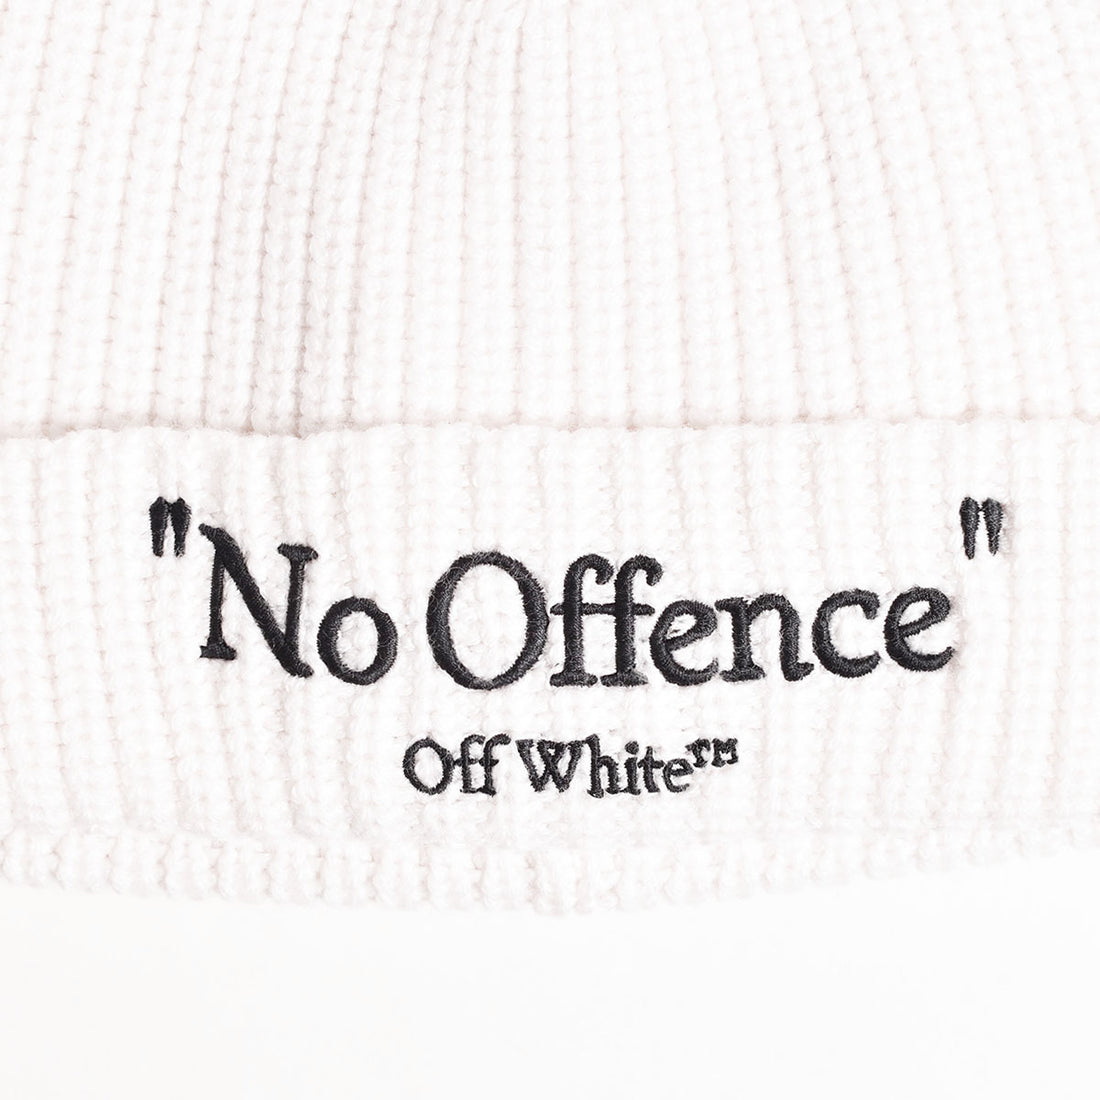 [Off-White]NO OFFENCE CLASSIC KNIT BEANIE/IVORY/BLACK(OMLE23-RTW0820)